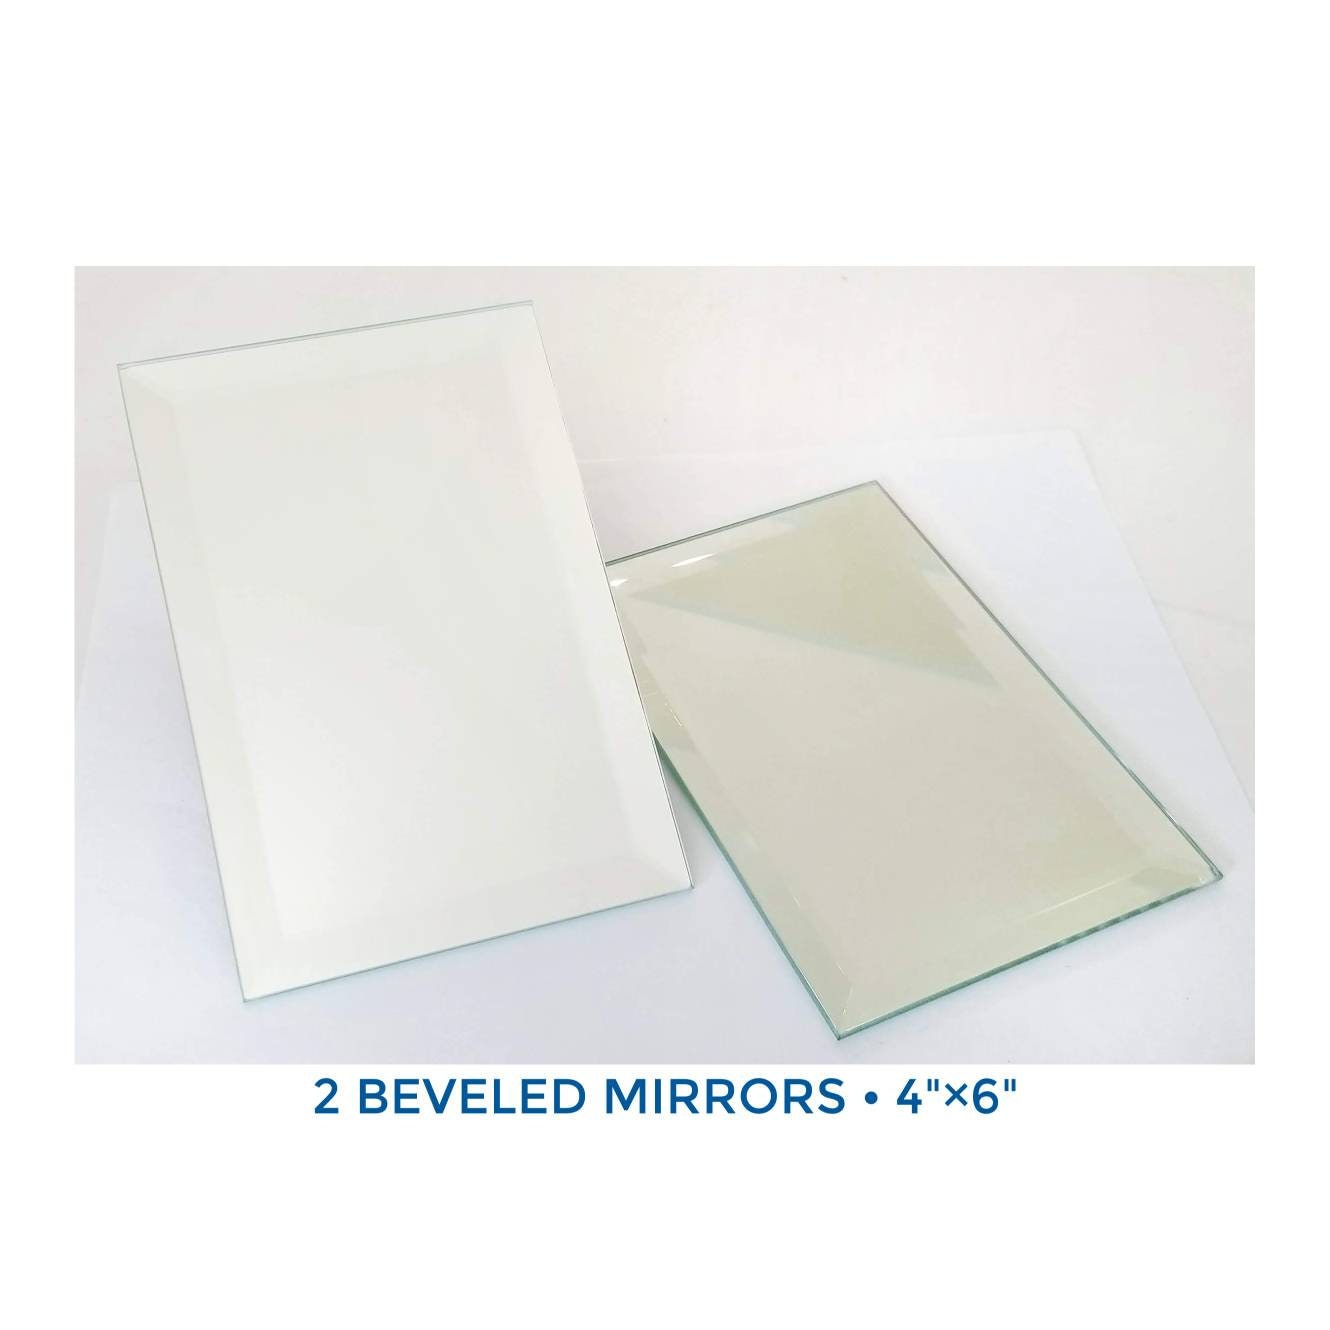 Mirror Bevels for Stained Glass Crafts & Mosaic. 4"×6" Mirror, Diy Project, add colorful tiles to create a cute wall frame. 2 ea. or 4 pack.